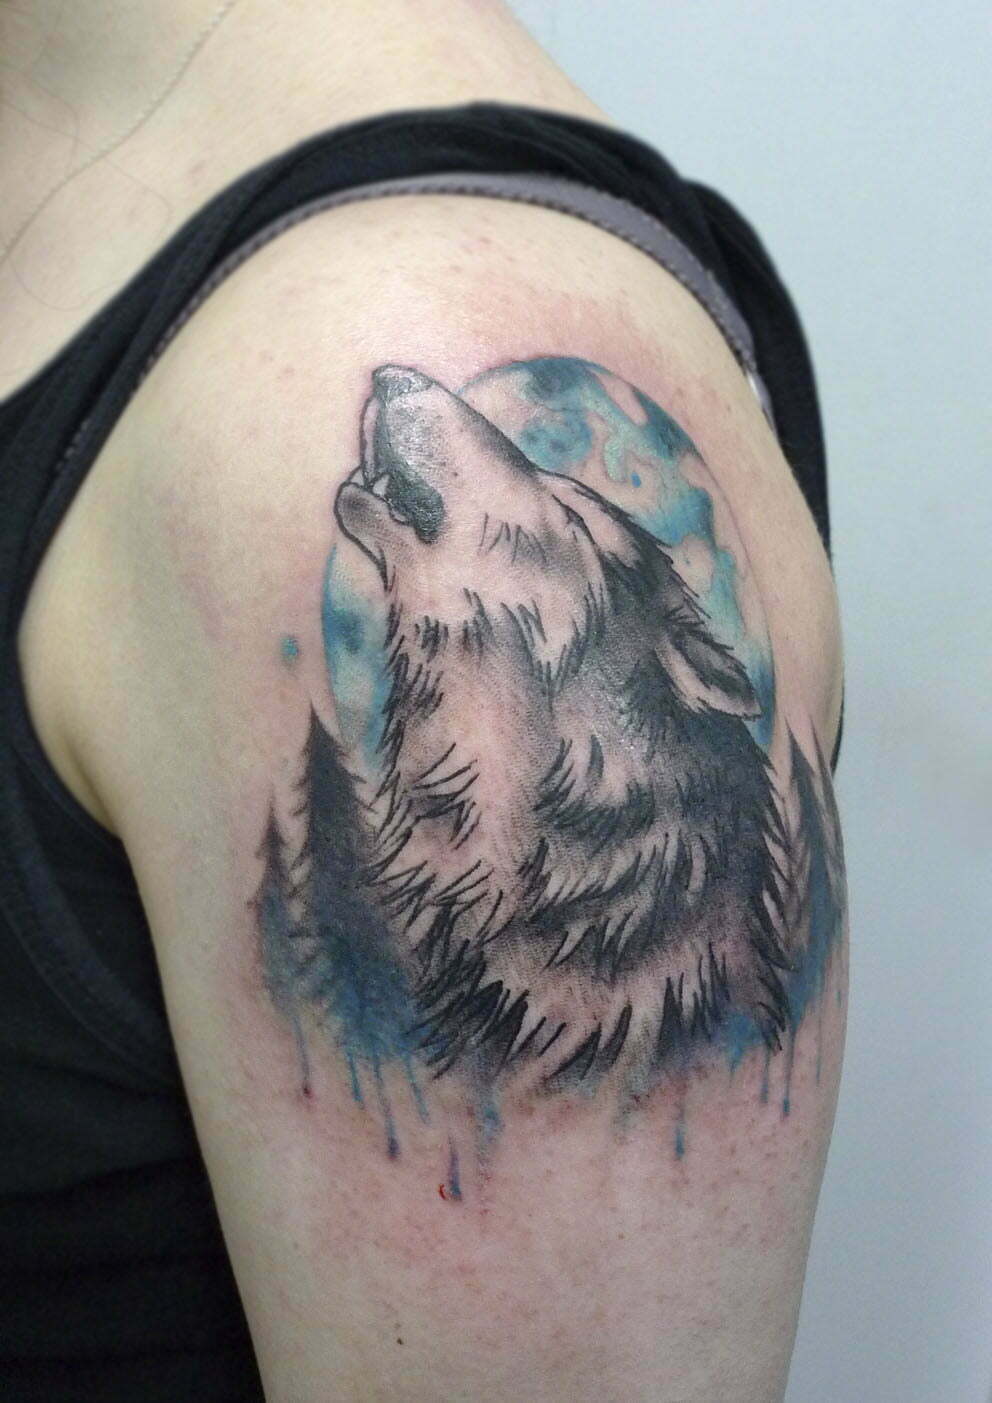 Tattoo uploaded by Daniel Warnock • Start of a Native American themed  sleeve on my left shoulder. Tattoo done by Lucky Thirteen tattoo studio in  Belfast, Northern Ireland. #Wolf #WolfTattoo #NativeAmerican • Tattoodo